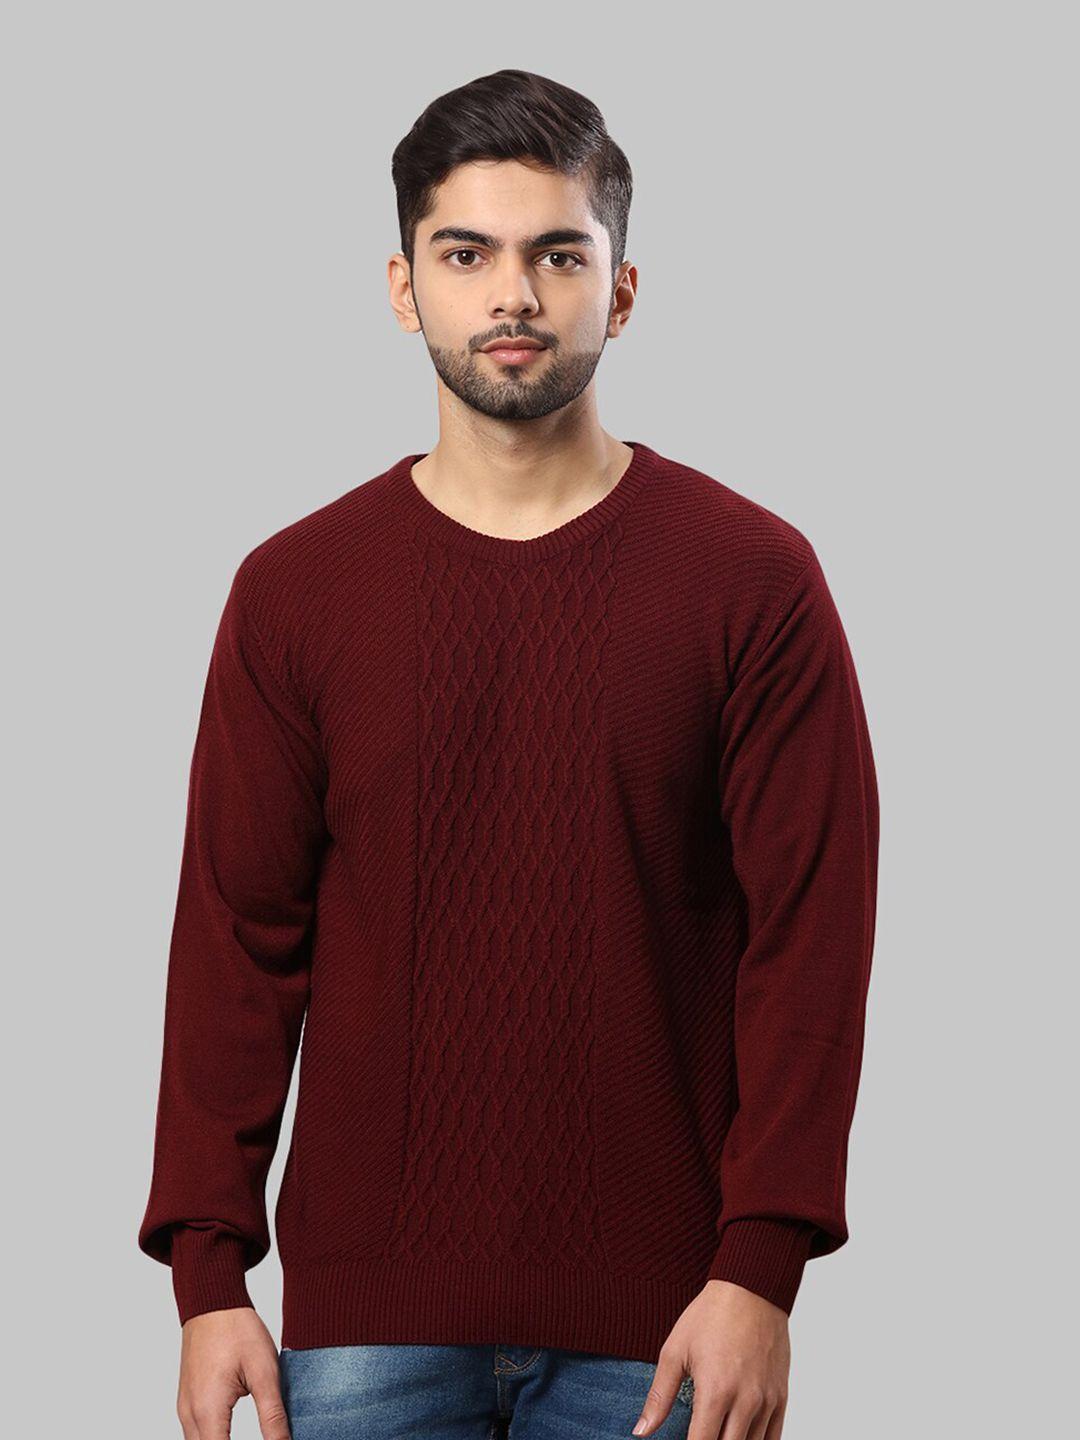 raymond men maroon cable knit pullover sweater